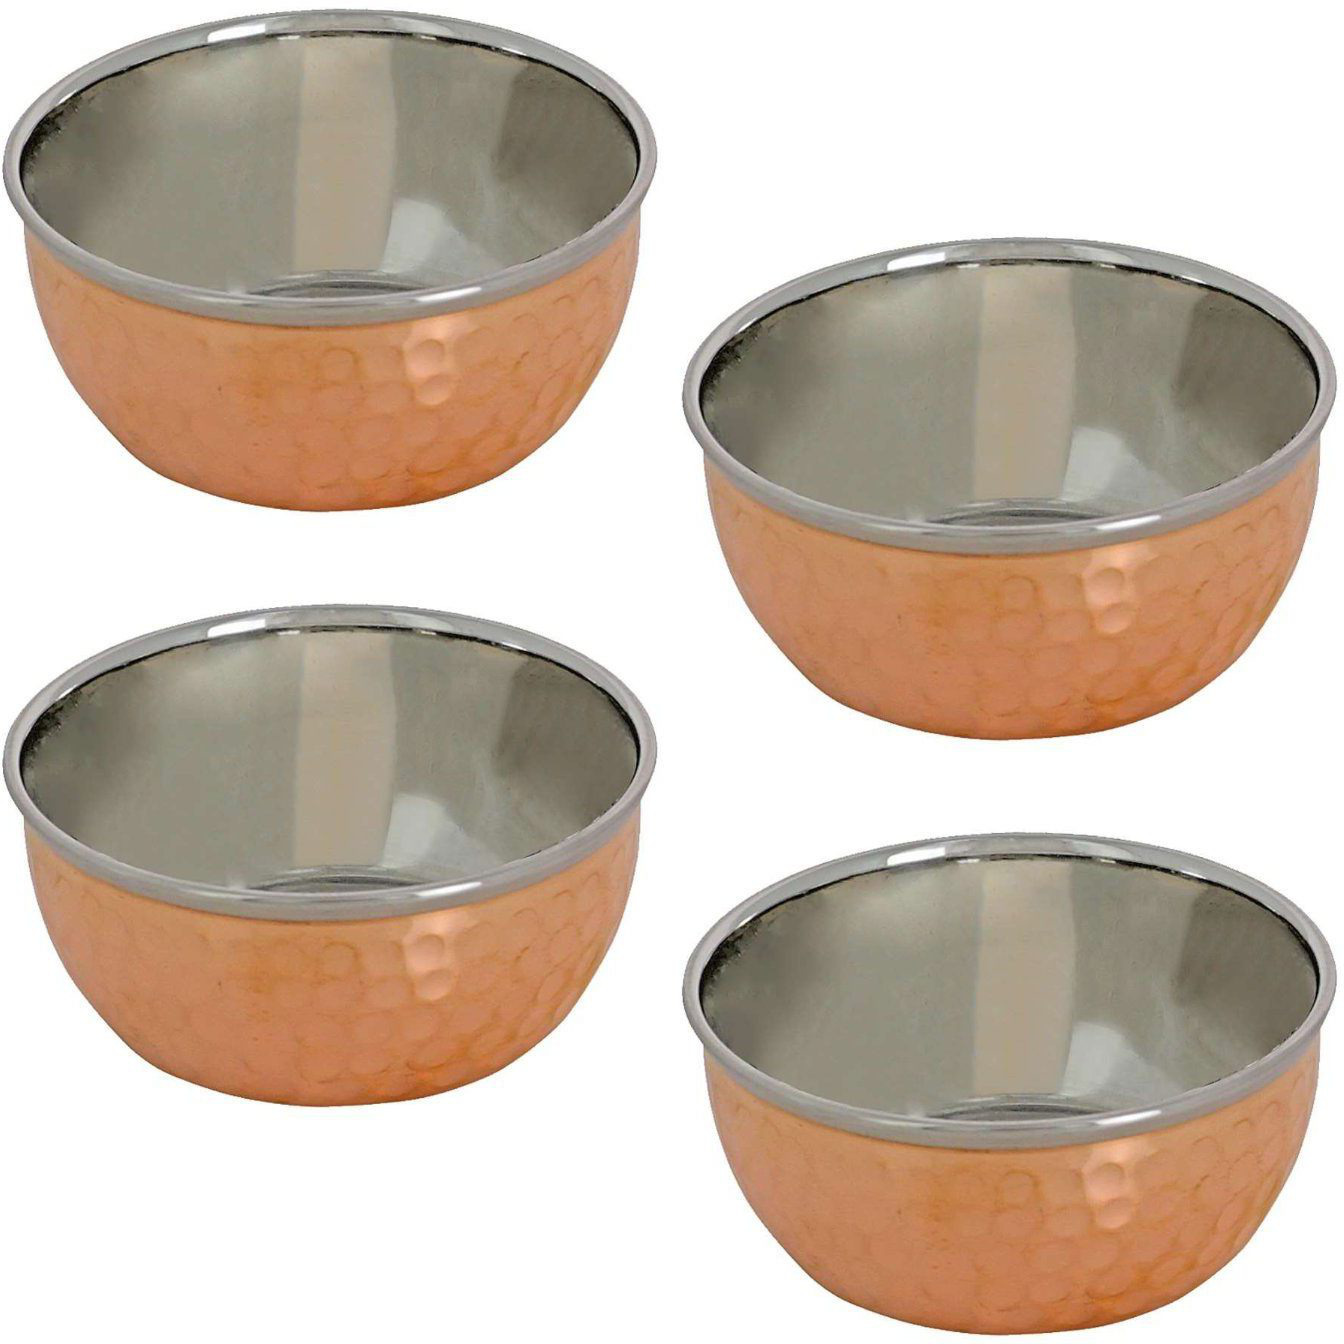 Prisha India Craft B. Set of 5 Dinnerware Traditional Stainless Steel Copper Dinner Set of Thali Plate, Bowls, Glass and Spoons, Dia 13  With 1 Pure Copper Embossed Pitcher Jug - Christmas Gift